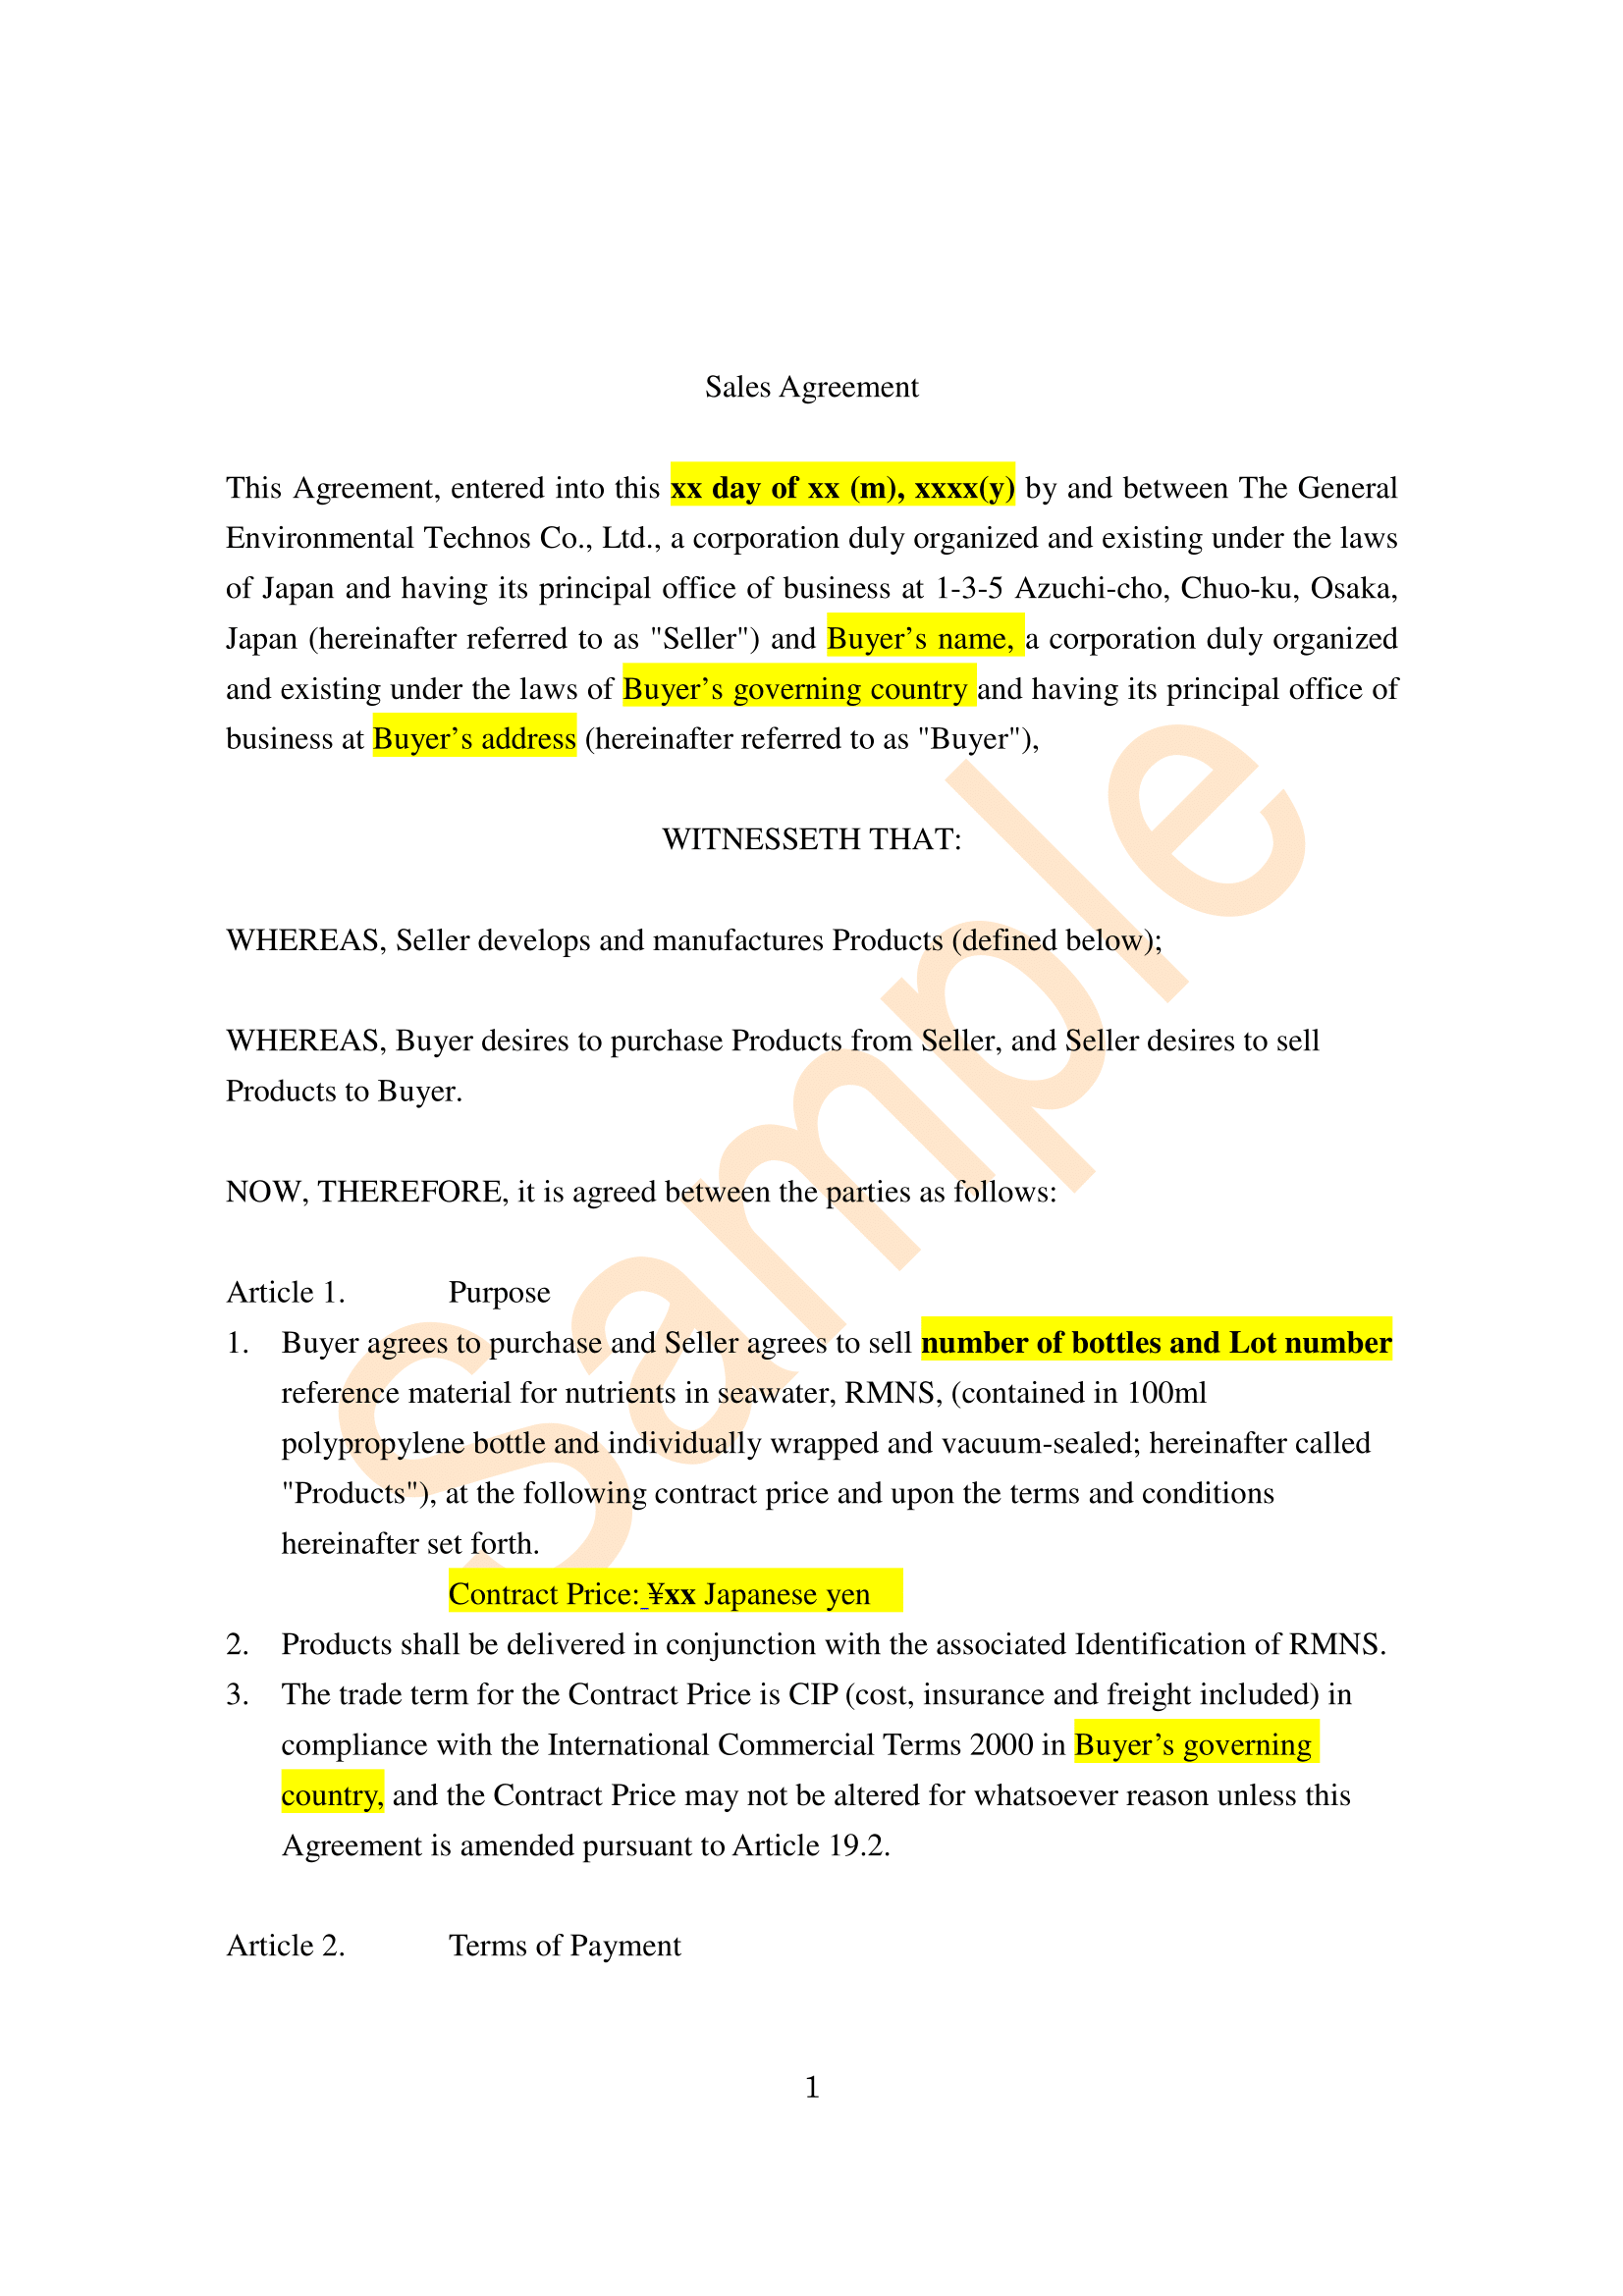 Product sales contract 1